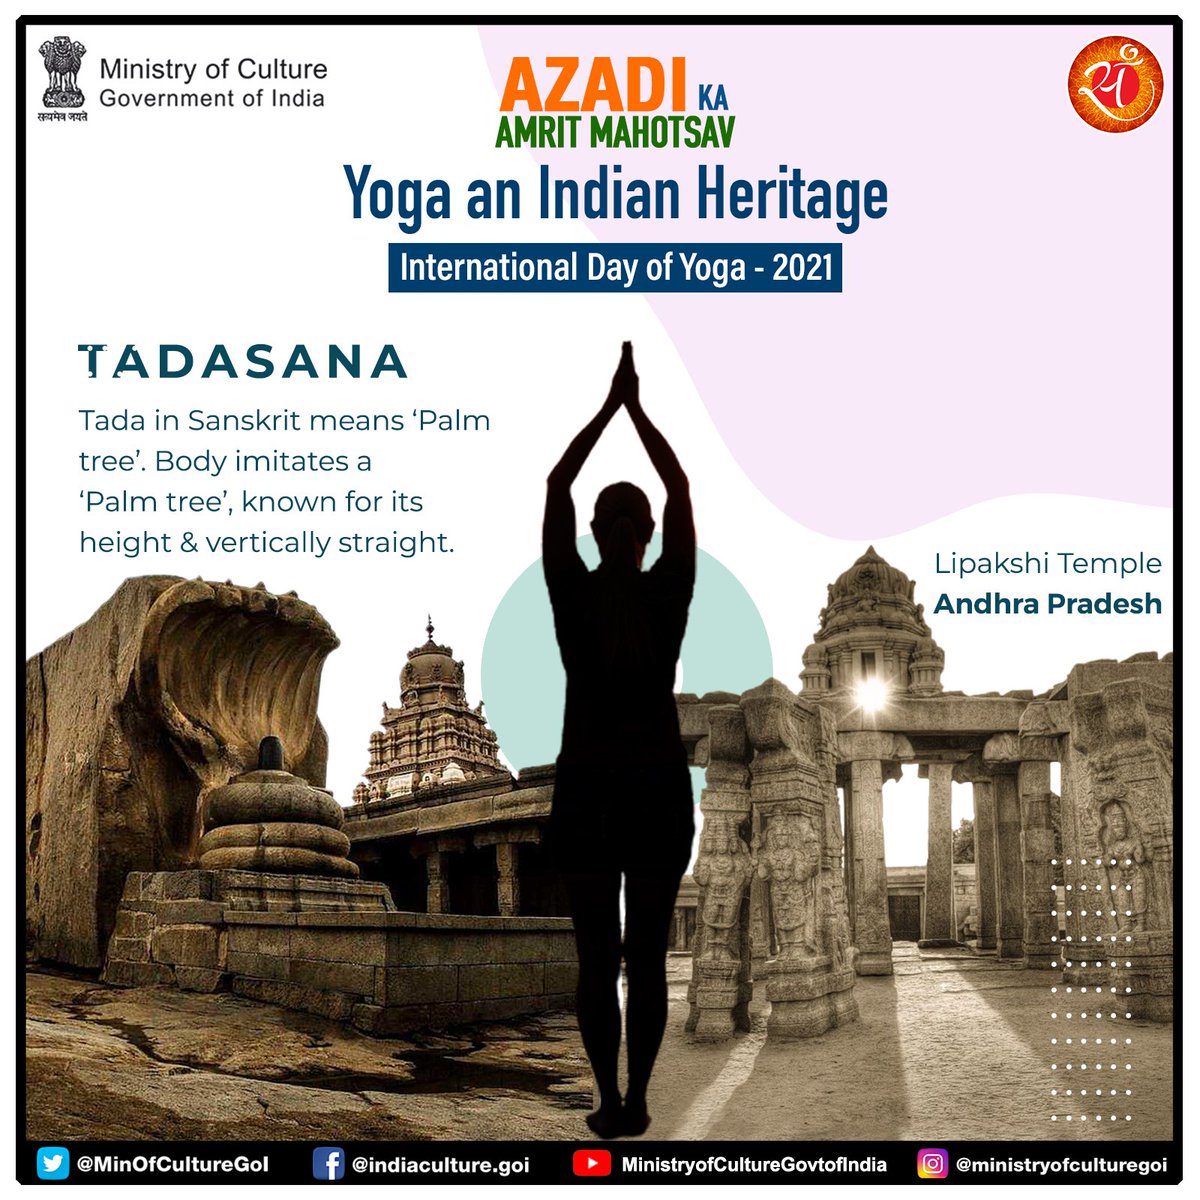 Tadasana- Tada in Sanskrit means ‘Palm tree’. Body imitates a ‘Palm tree’, known for its height & vertically straight. It strengthens whole body muscles, thighs, knees and ankles, helps in improving height of growing children. Removes laziness and lethargy. #YogaAnIndianHeritage